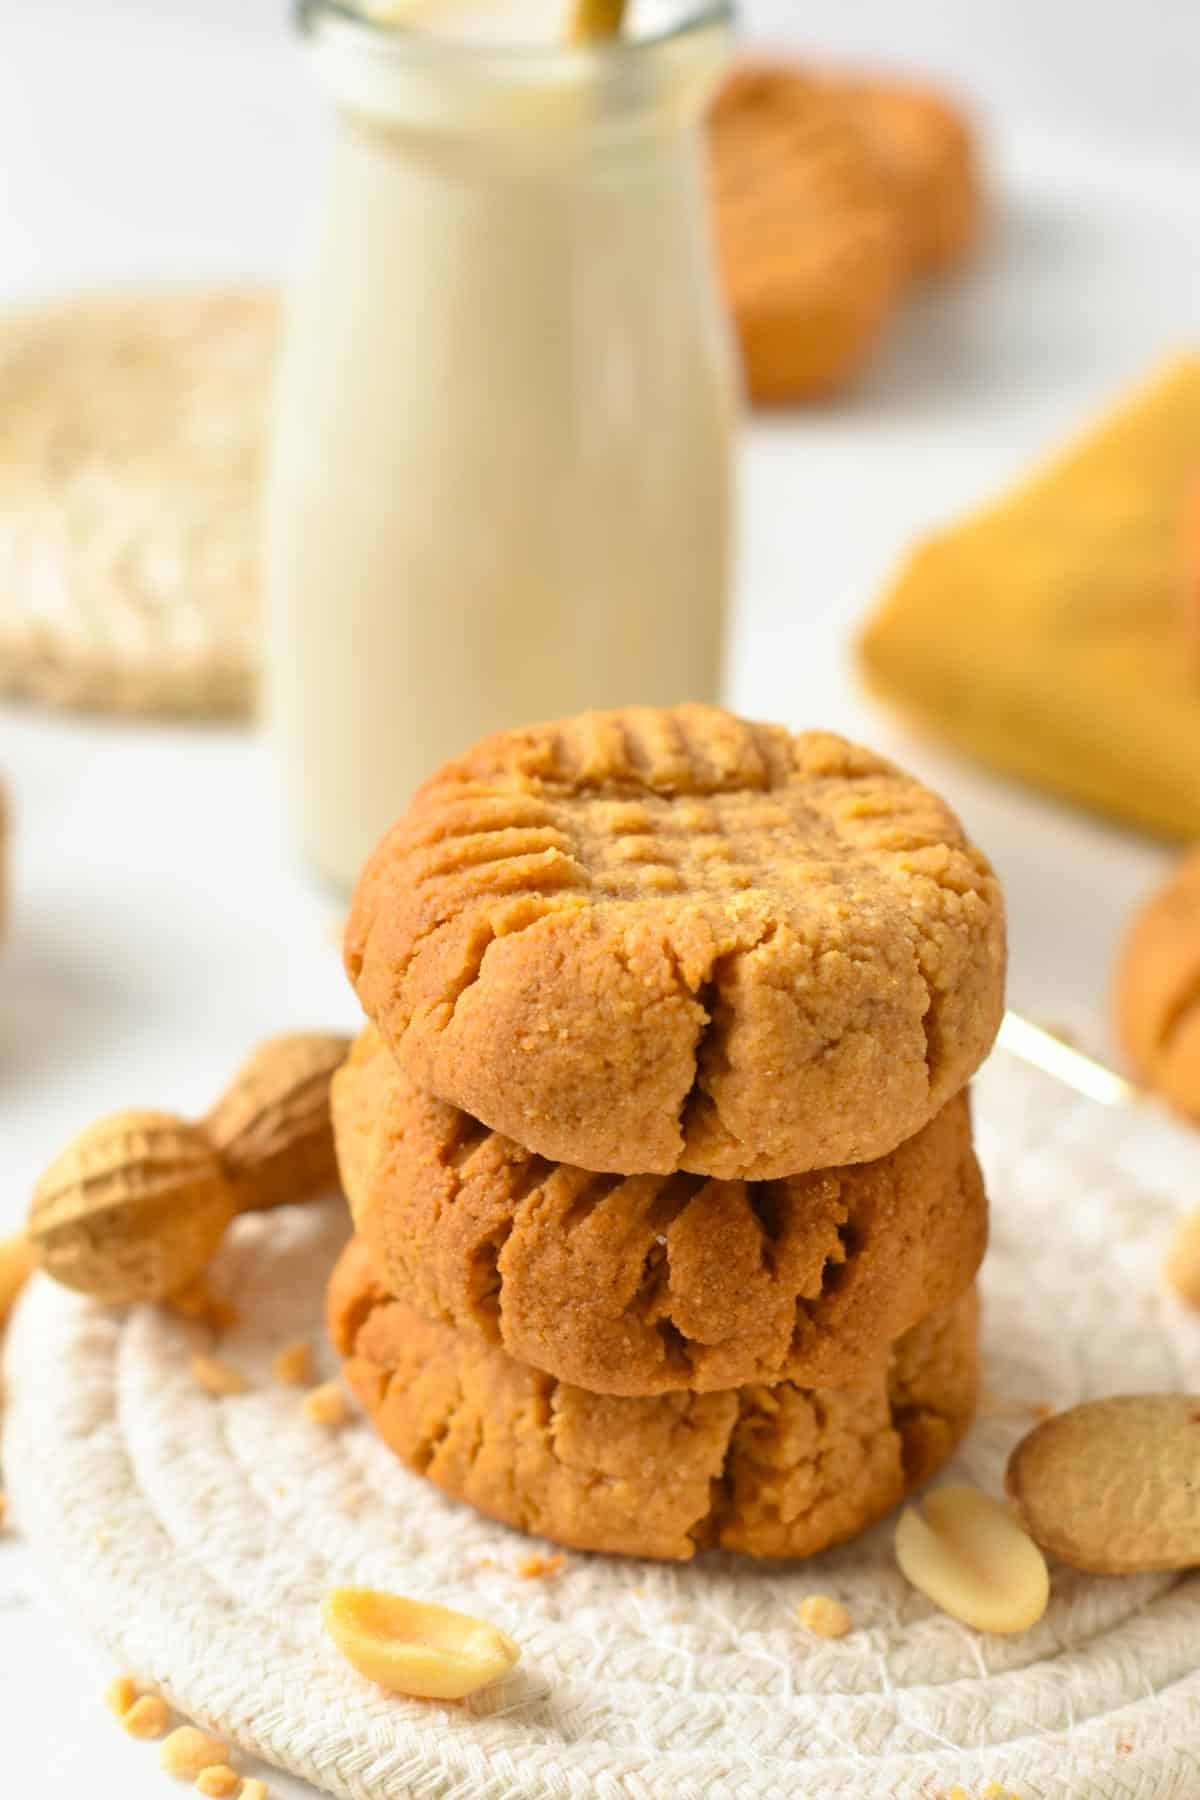 A stack of three peanut butter cookies with a crisscross pattern on top and a bottle of milk in the back.